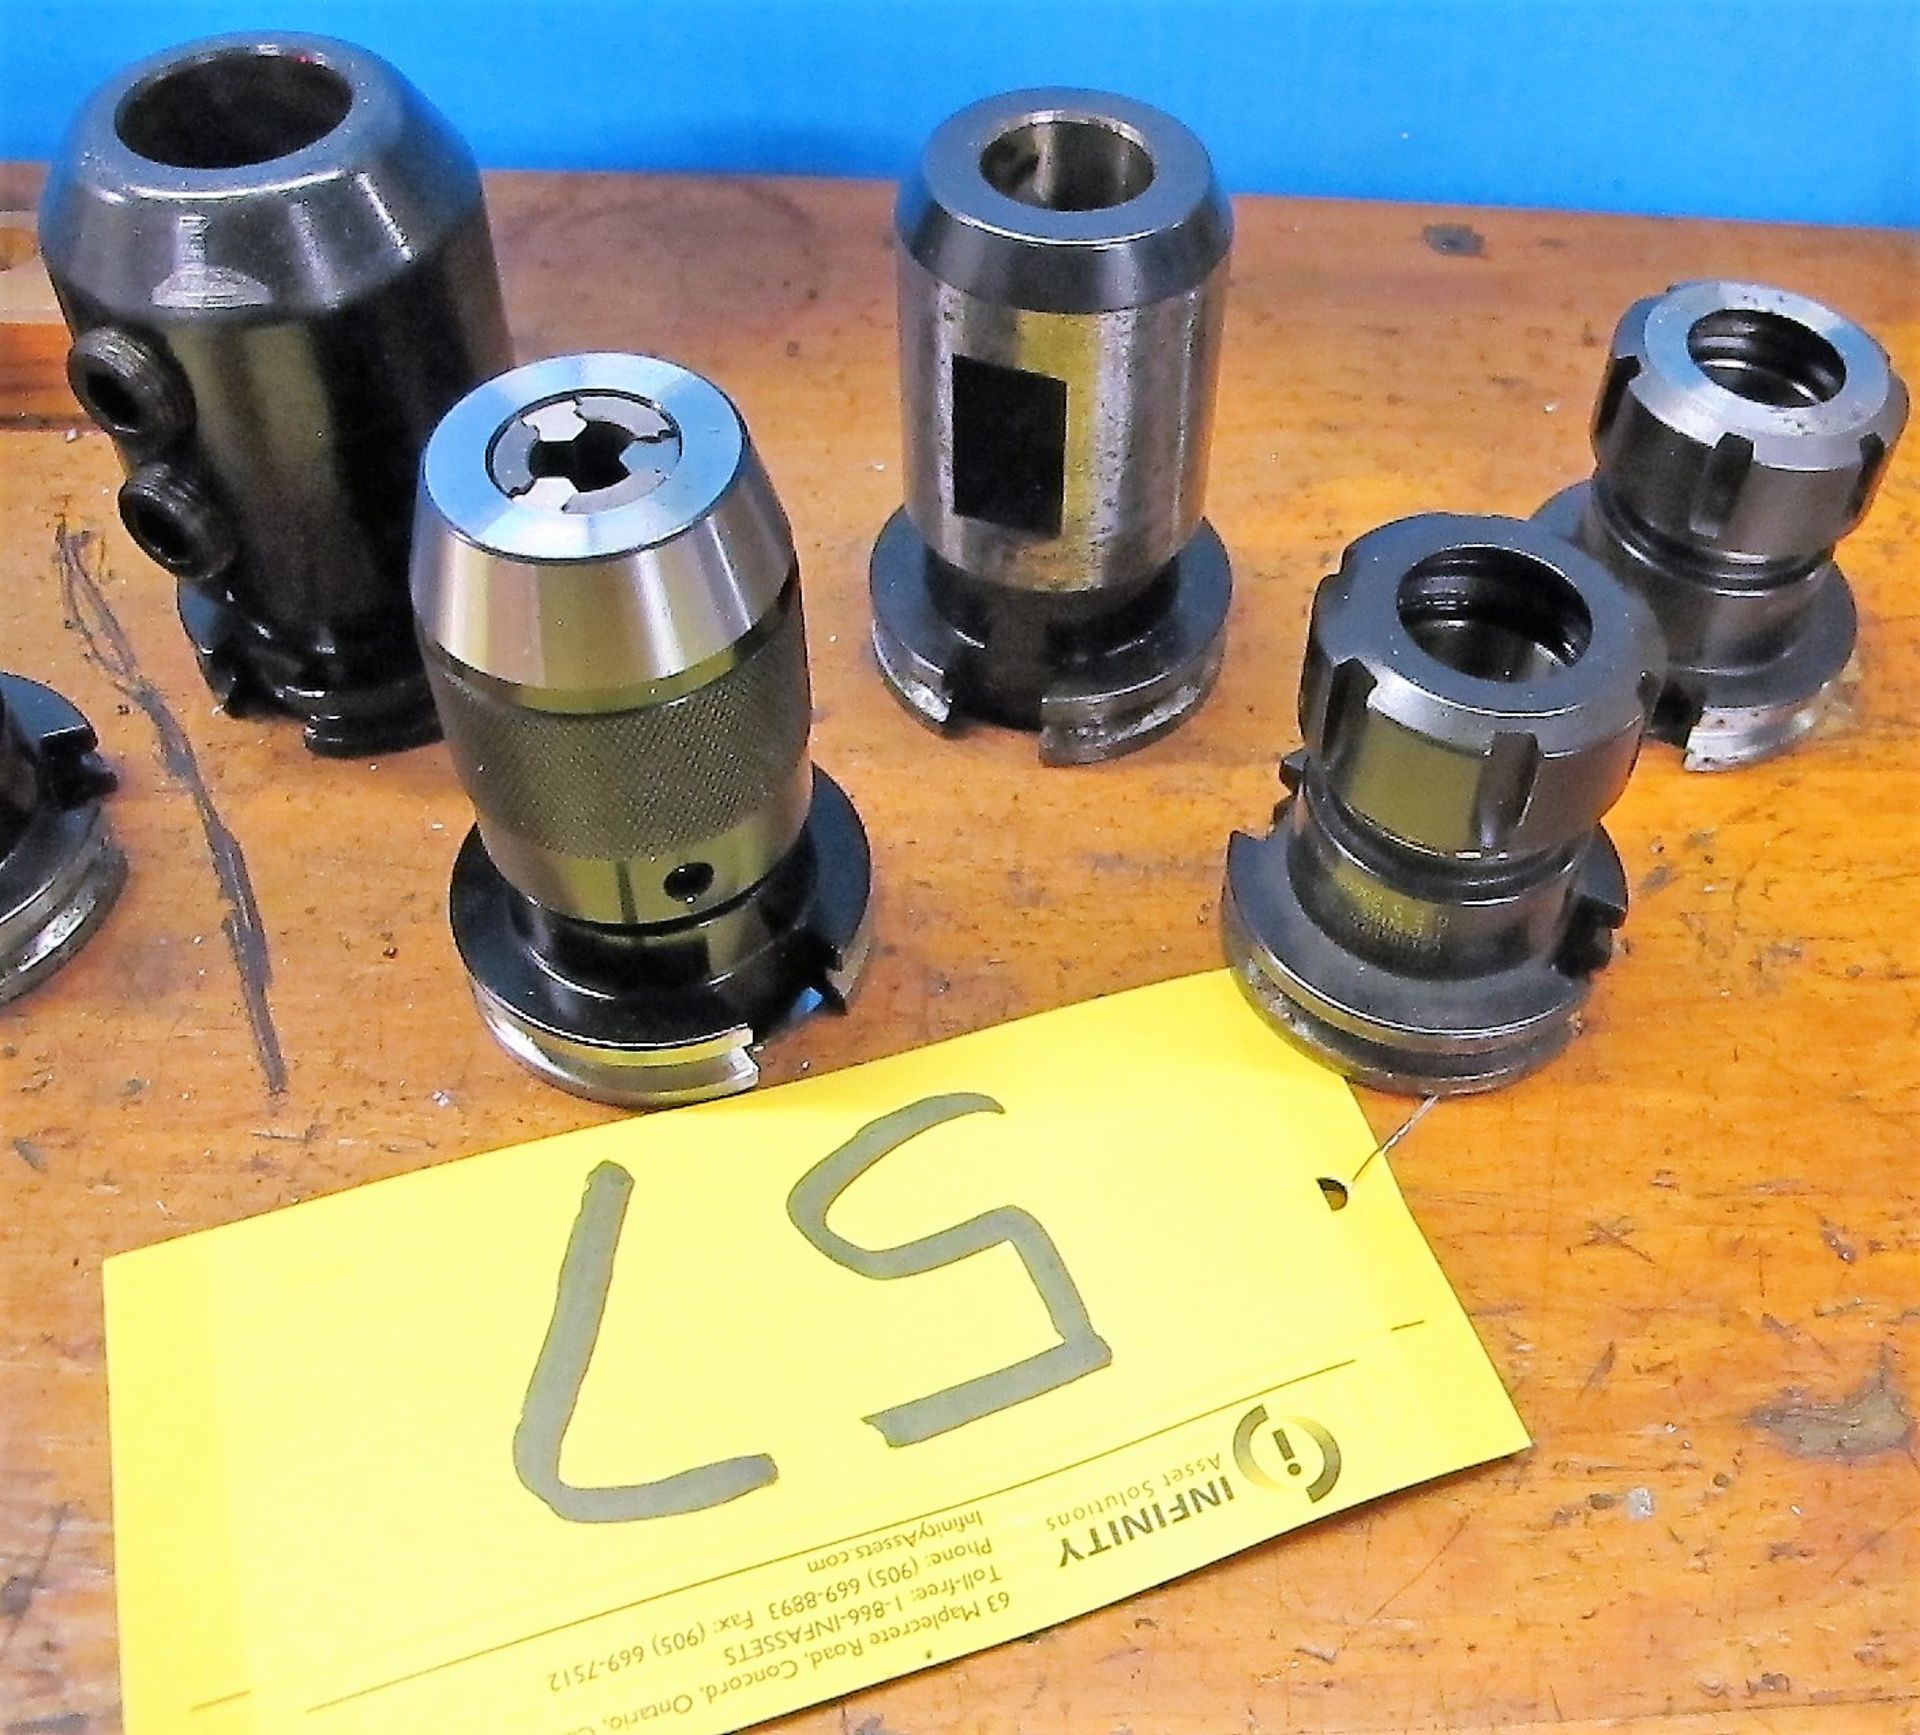 LOT OF 40 TAPER TOOL HOLDERS W/ATTACHMENTS